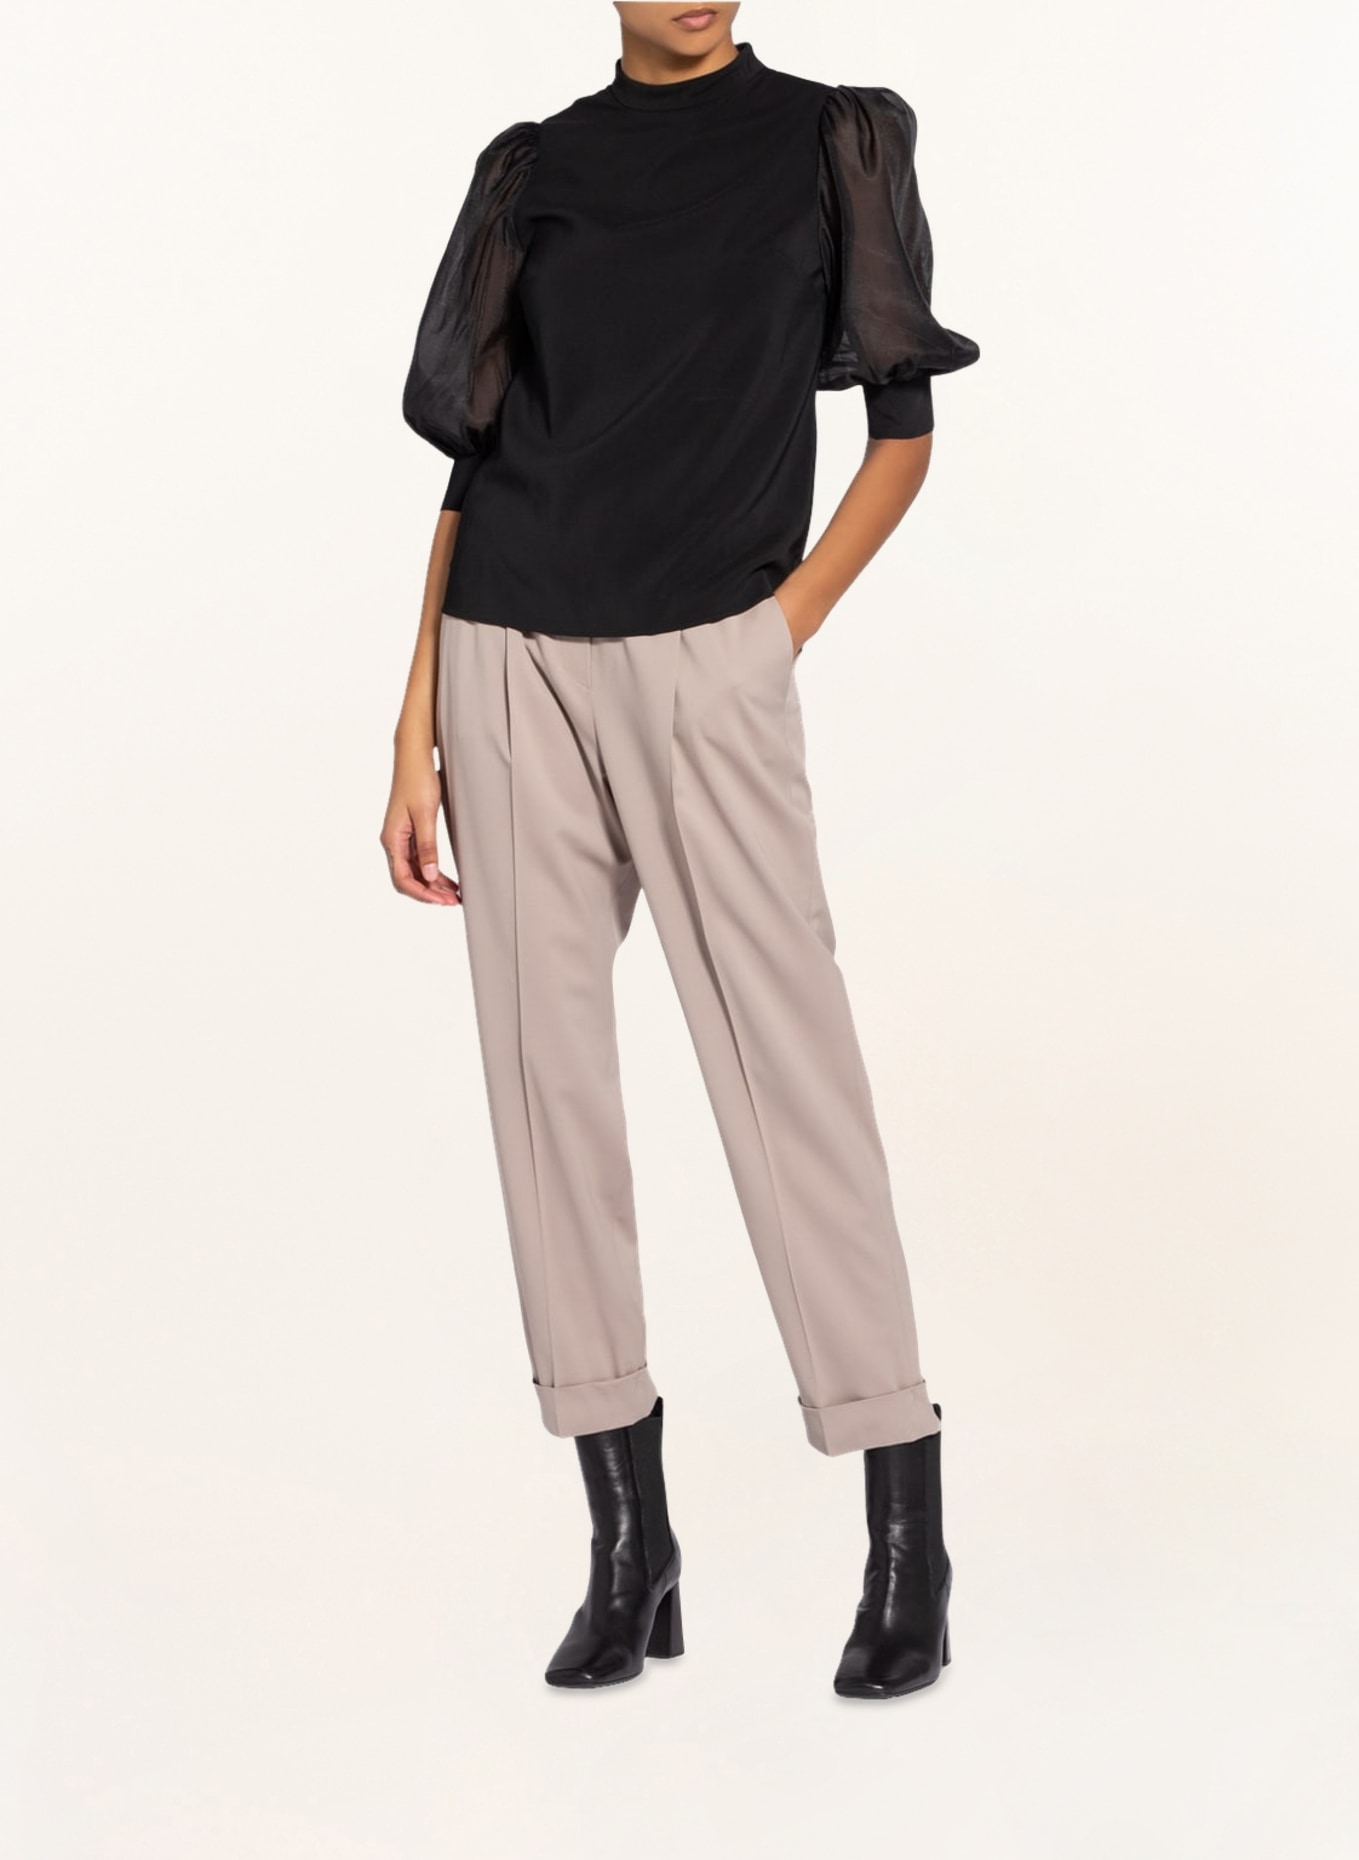 TED BAKER Shirt blouse MICAELI with 3/4 sleeves, Color: BLACK (Image 2)